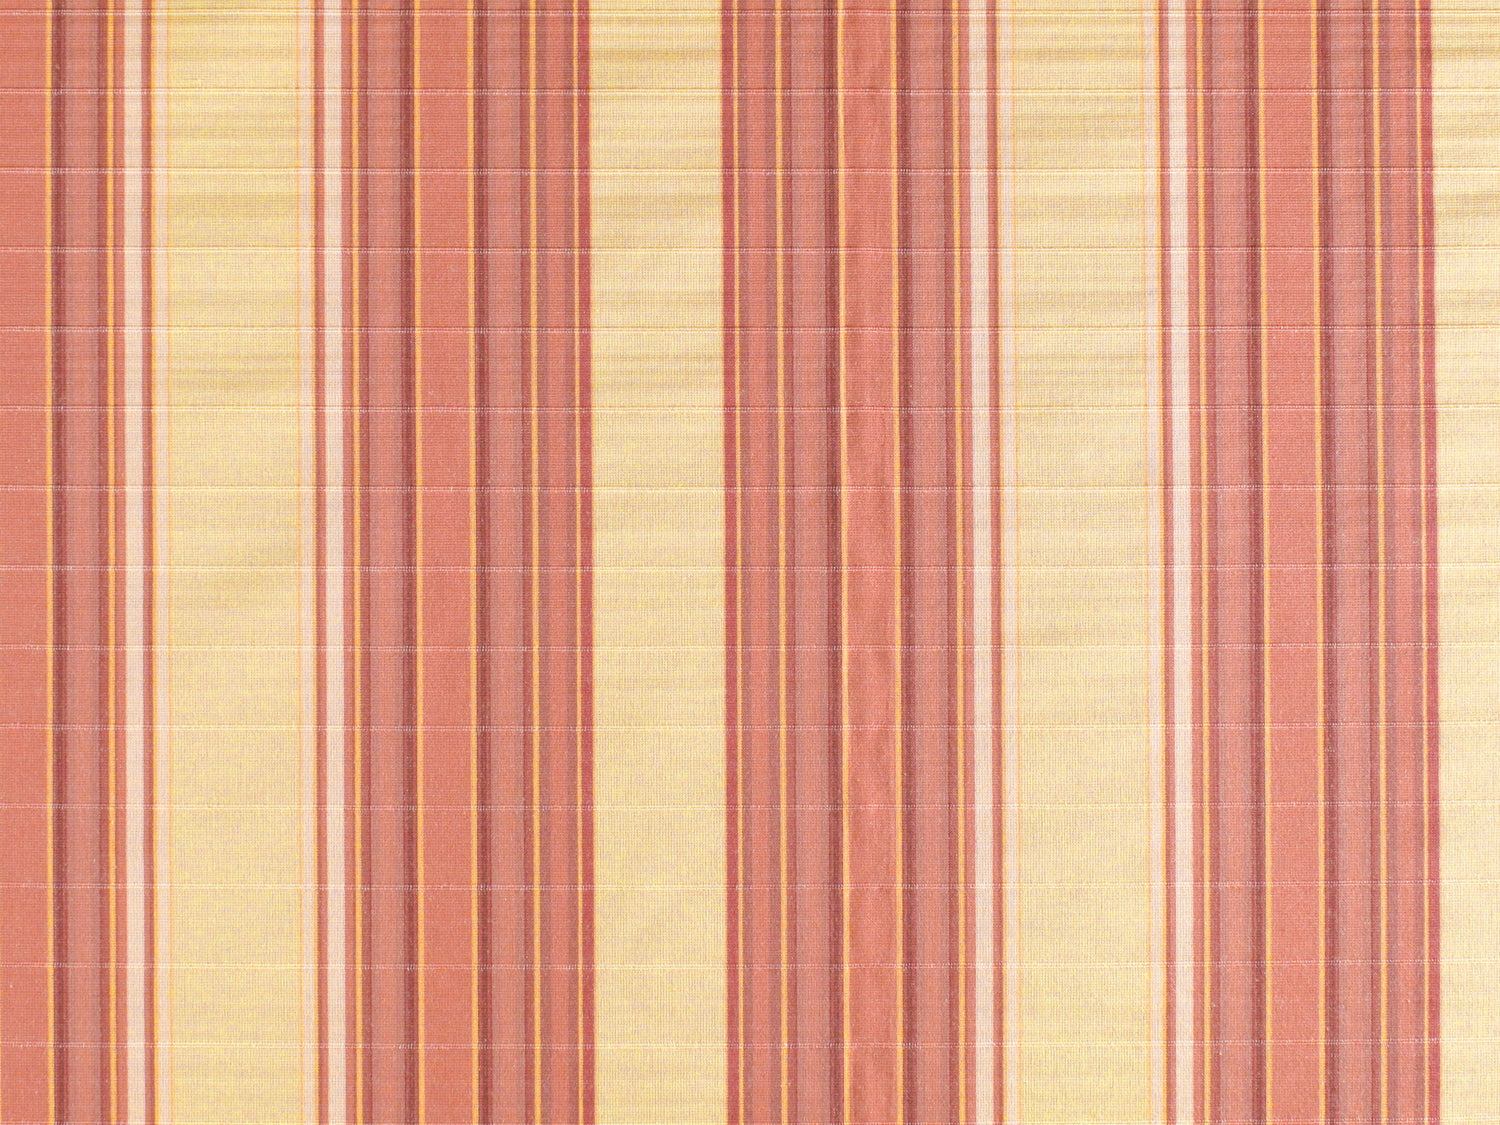 Cordina Stripe fabric in coral color - pattern number DY 00040211 - by Scalamandre in the Old World Weavers collection